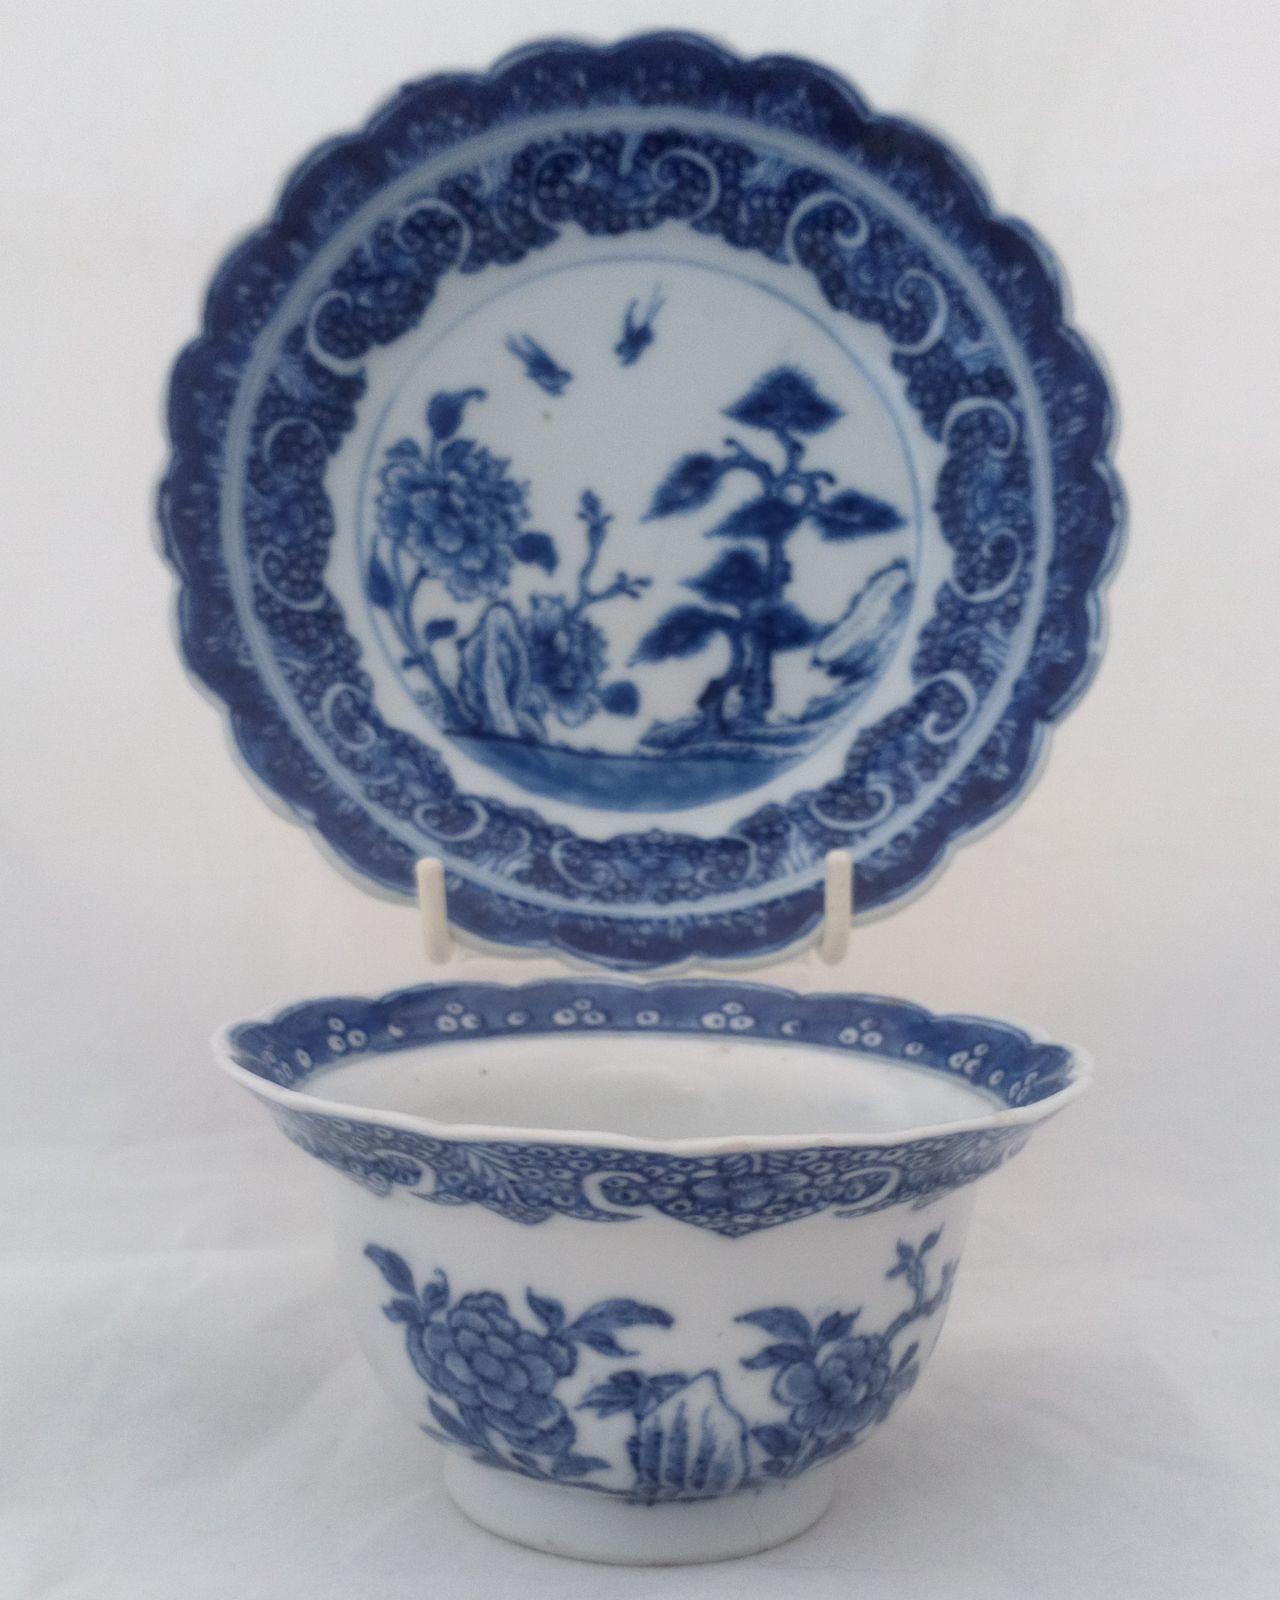 Antique Chinese porcelain hand painted blue and white everted and scalloped rim tea bowl and saucer made during the reign of the Chinese emperor Qianlong 乾隆 during the Qing dynasty circa 1760.